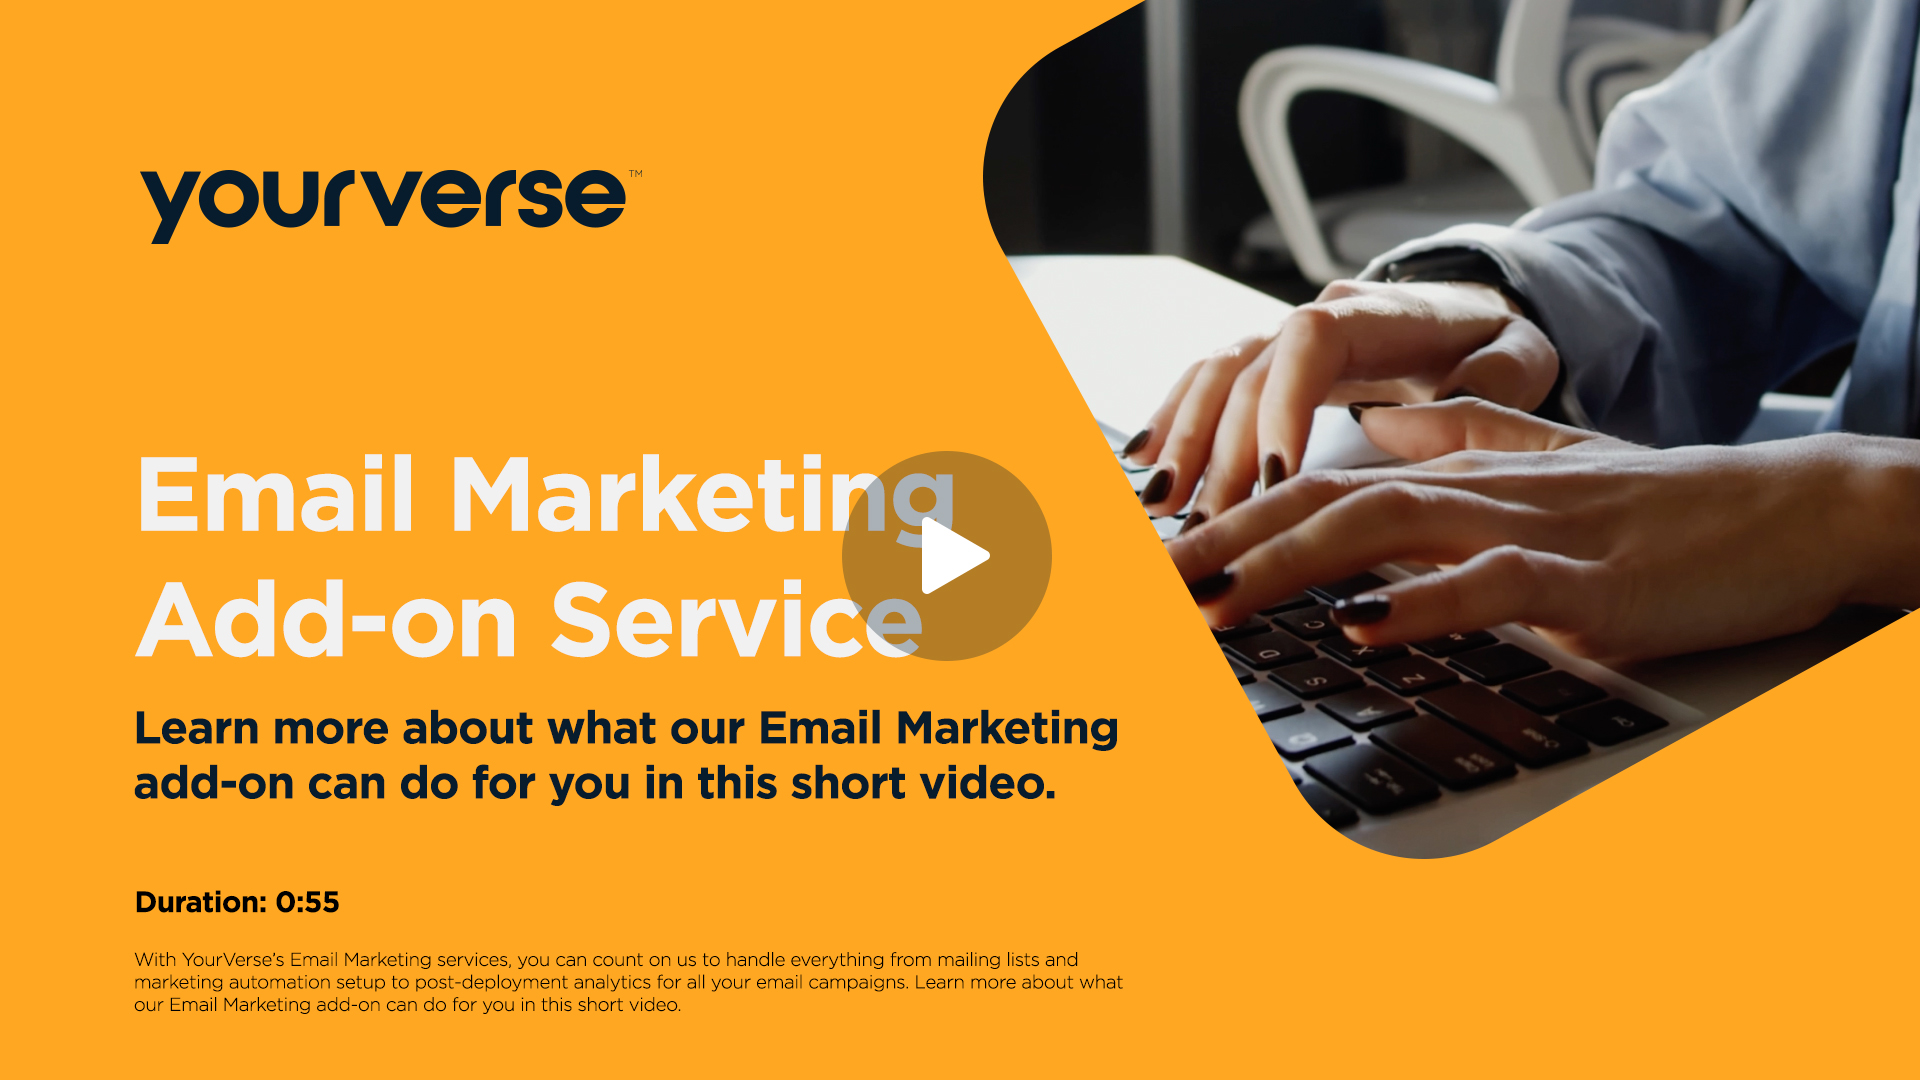 Email Marketing Add-on Service